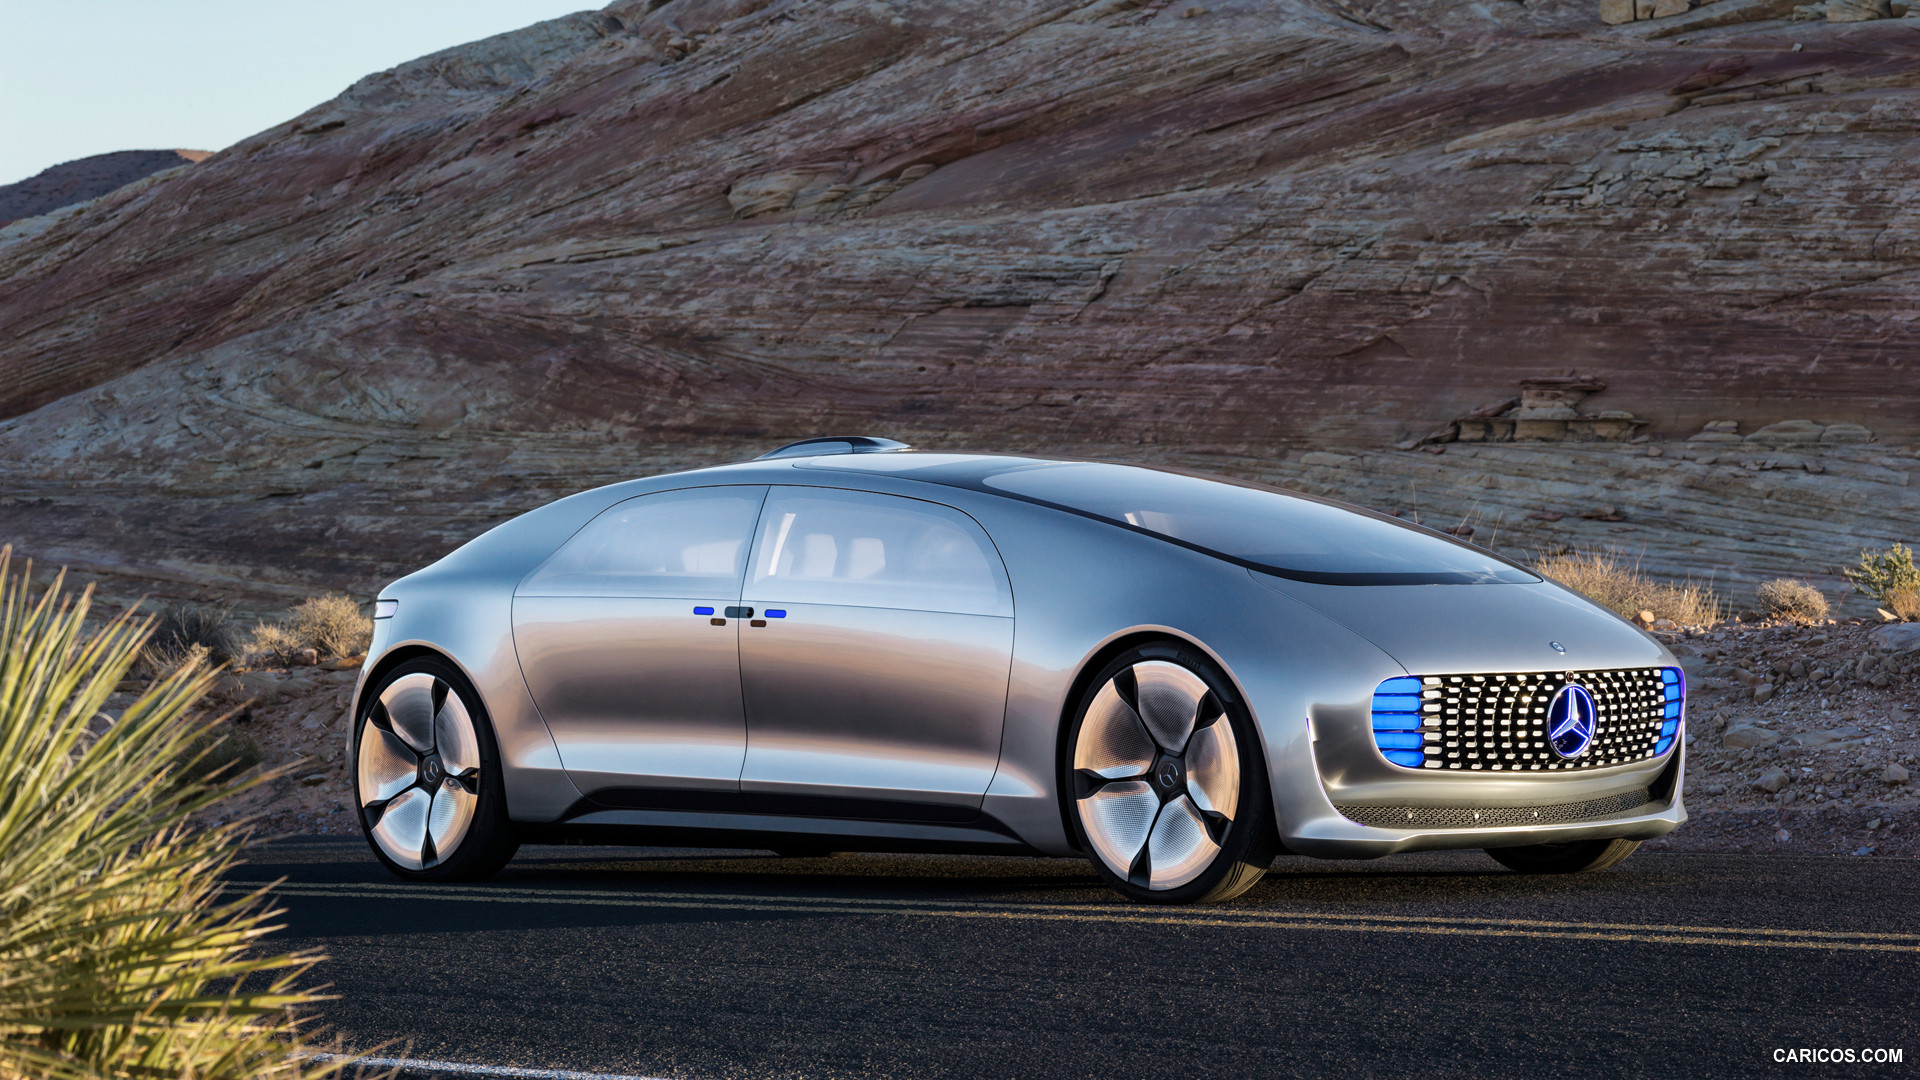 2015 Mercedes-Benz F 015 Luxury in Motion Concept  - Front, #19 of 92